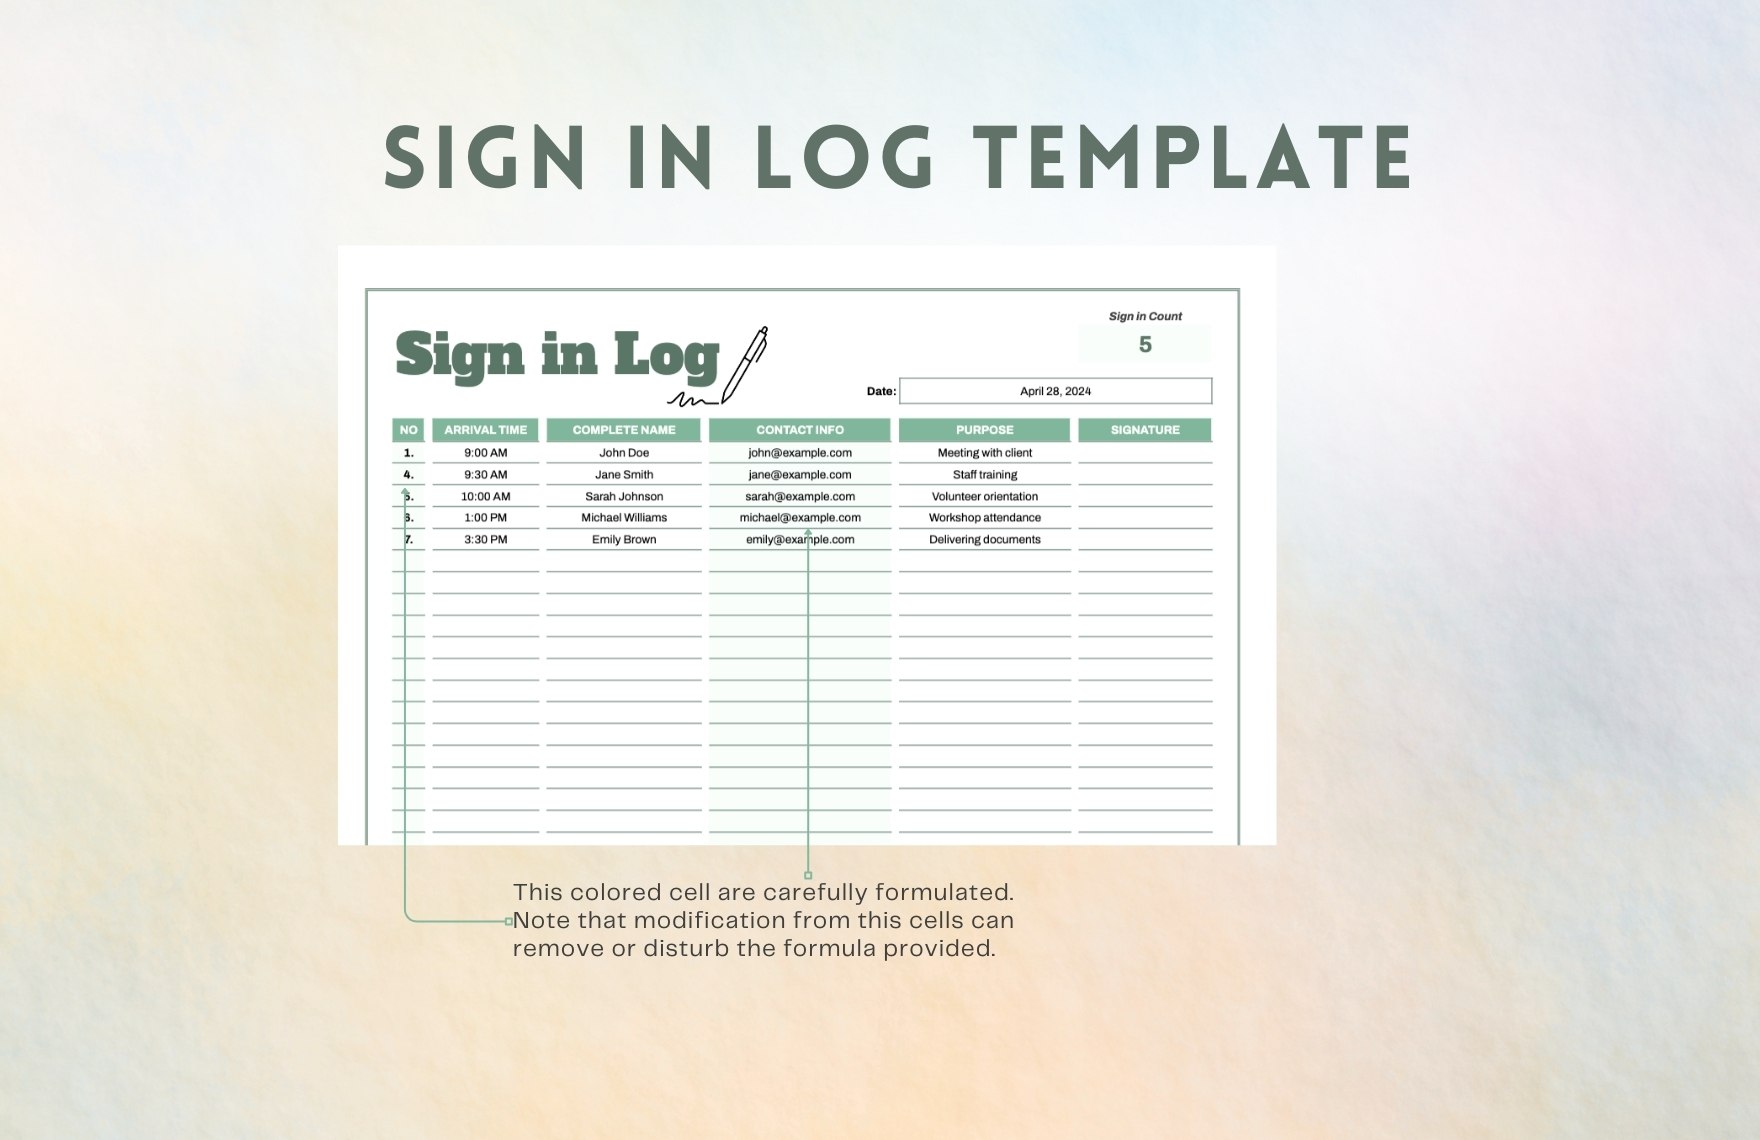 Sign in Log Template